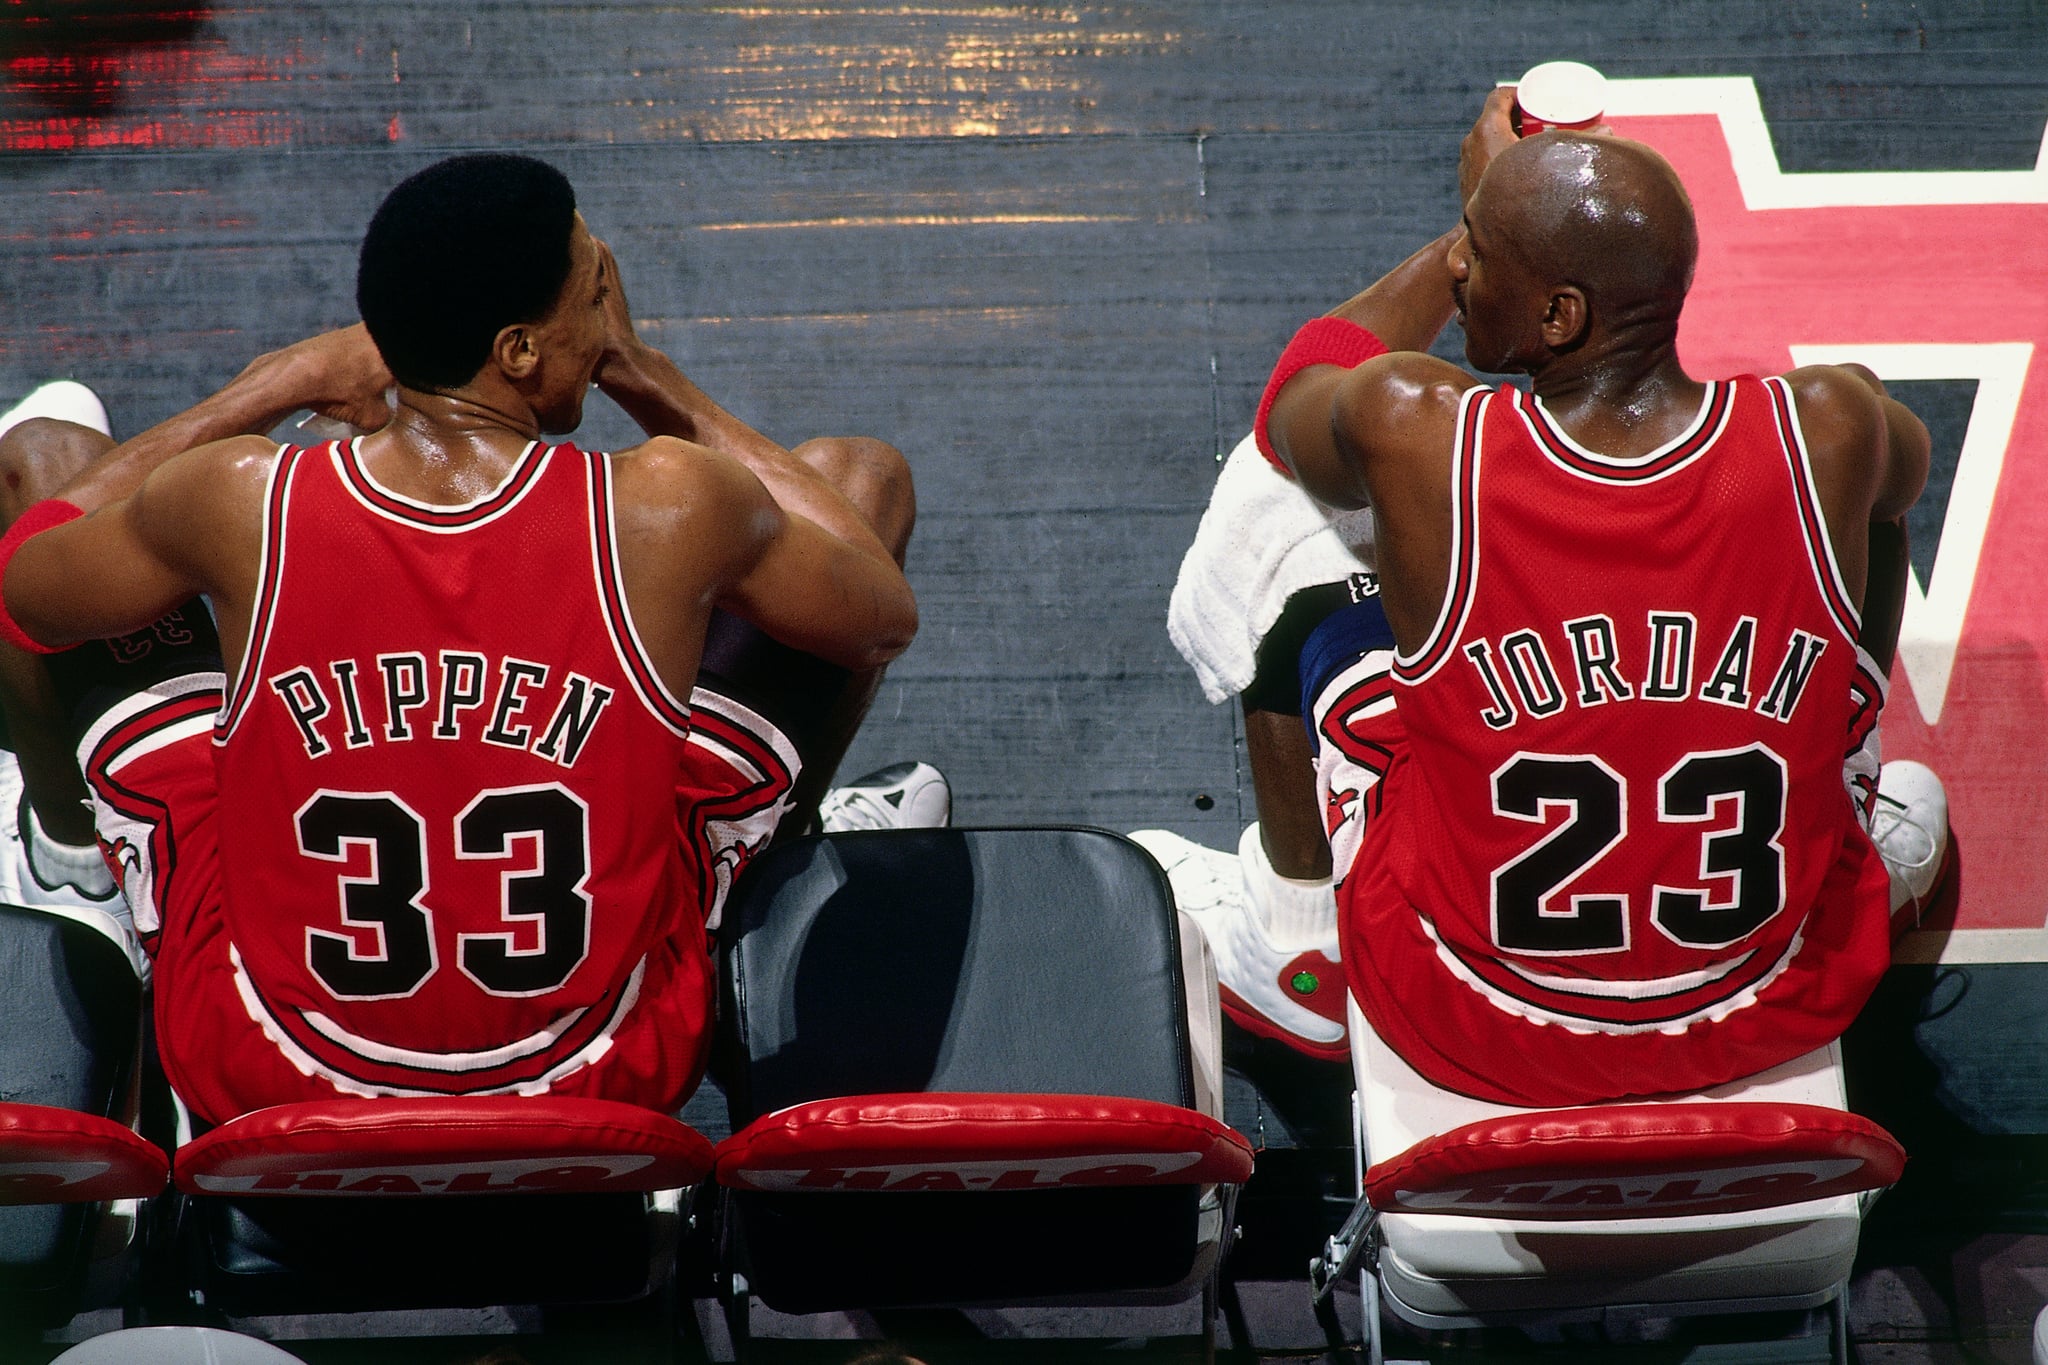 VANCOUVER, BC - JANUARY 27:  Scottie Pippen #33 and Michael Jordan #23 of the Chicago Bulls sit on the bench during the game against the Vancouver Grizzlies at General Motors Place on January 27, 1998 in Vancouver, British Columbia, Canada. NOTE TO USER: User expressly acknowledges and agrees that, by downloading and or using this photograph, User is consenting to the terms and conditions of the Getty Images License Agreement. Mandatory Copyright Notice: Copyright 1998 NBAE (Photo by Andy Hayt/NBAE via Getty Images)